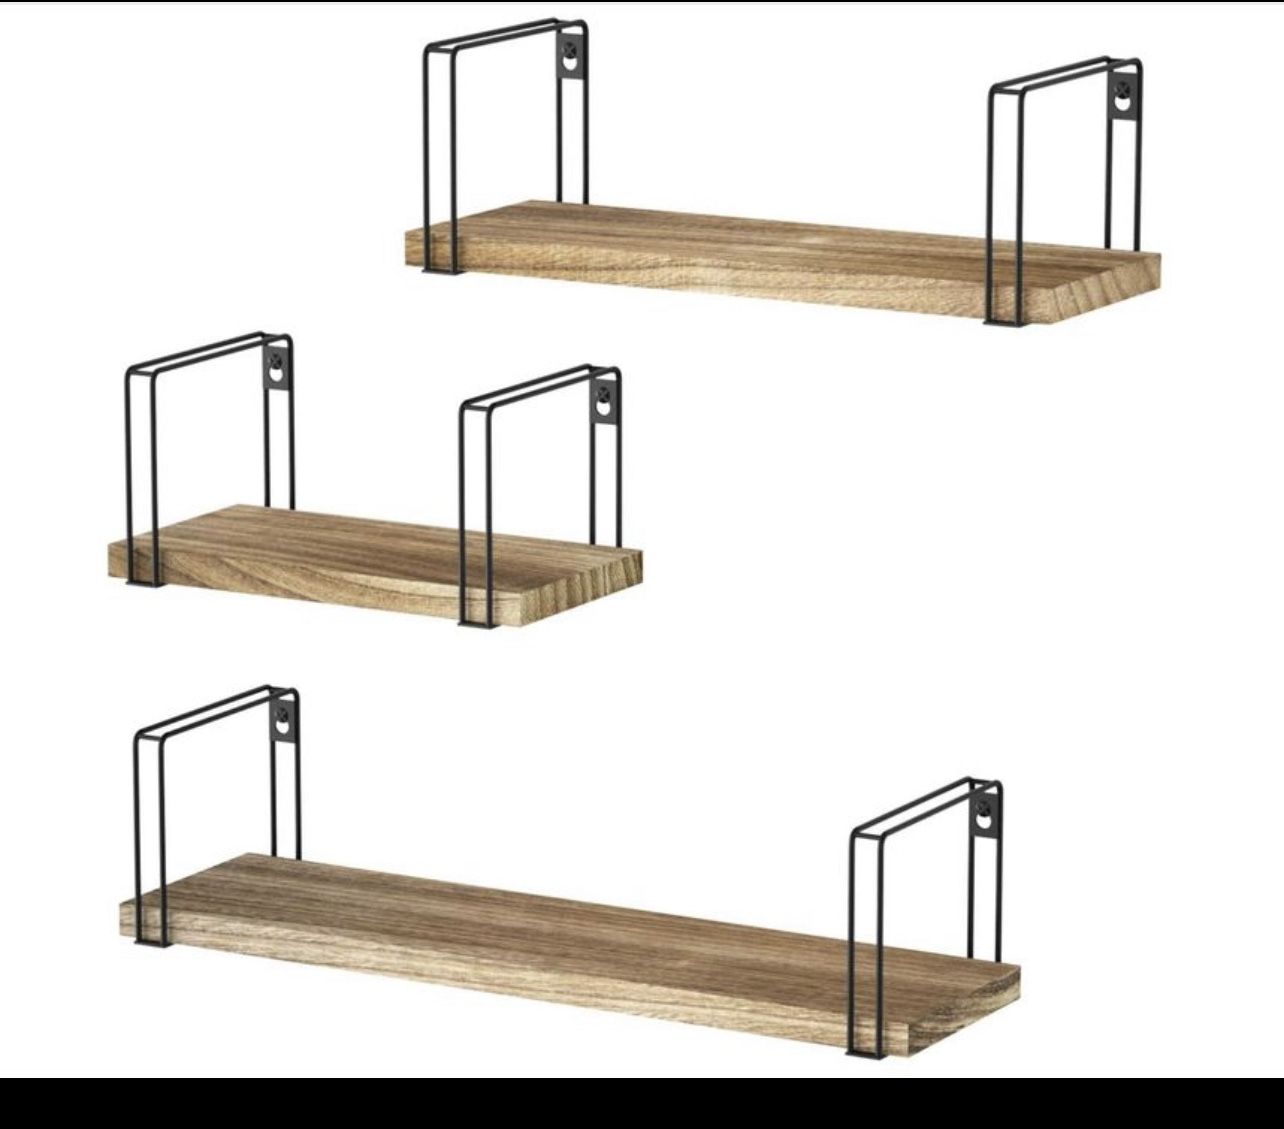 3 Floating wood Shelves: Large 17x 4.9 x 4.2 inch, med 13 x 4.9 x 4.2 inch, S 9x 4.9 x 4.2 inch.